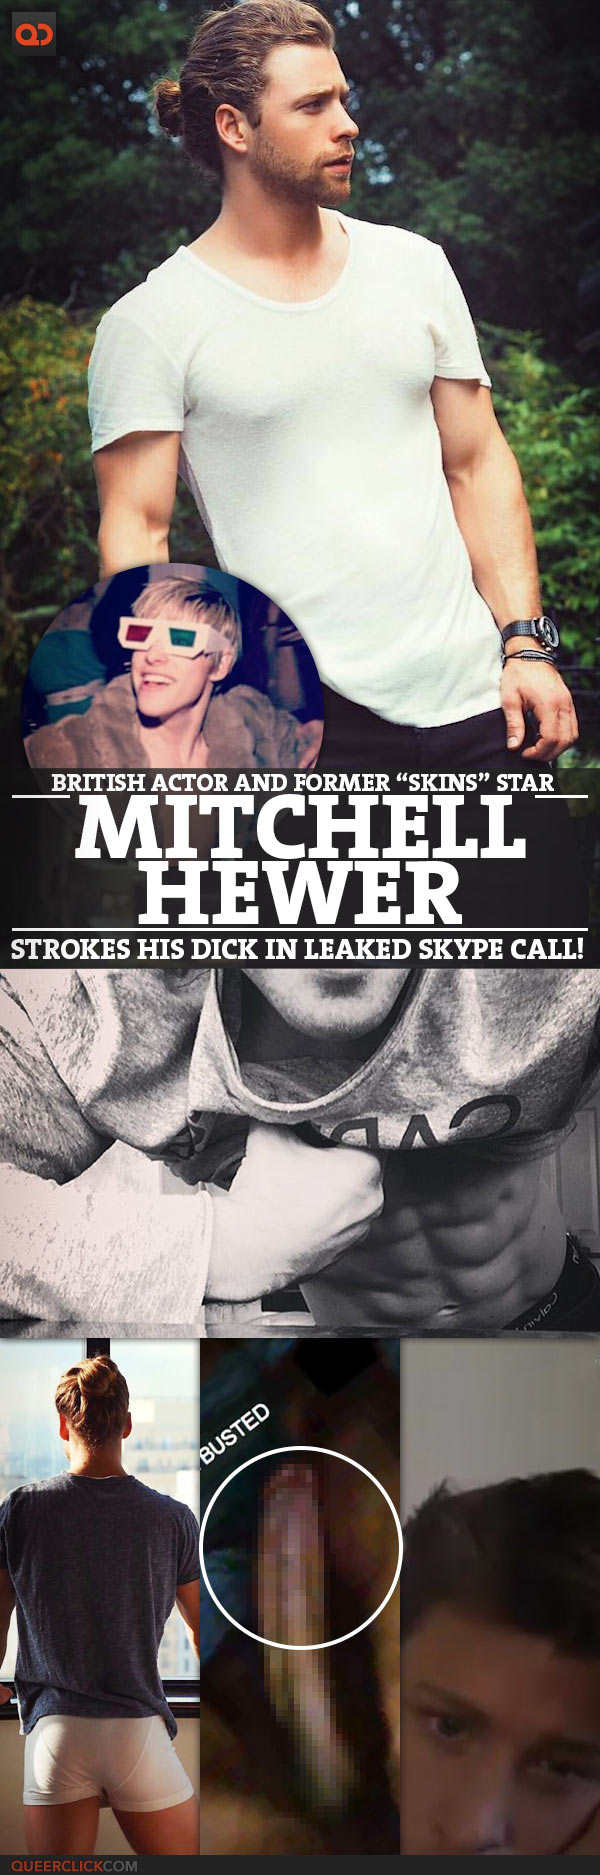 Mitchell Hewer, British Actor And Former “Skins” Star, Strokes His Dick In Leaked Skype Call!